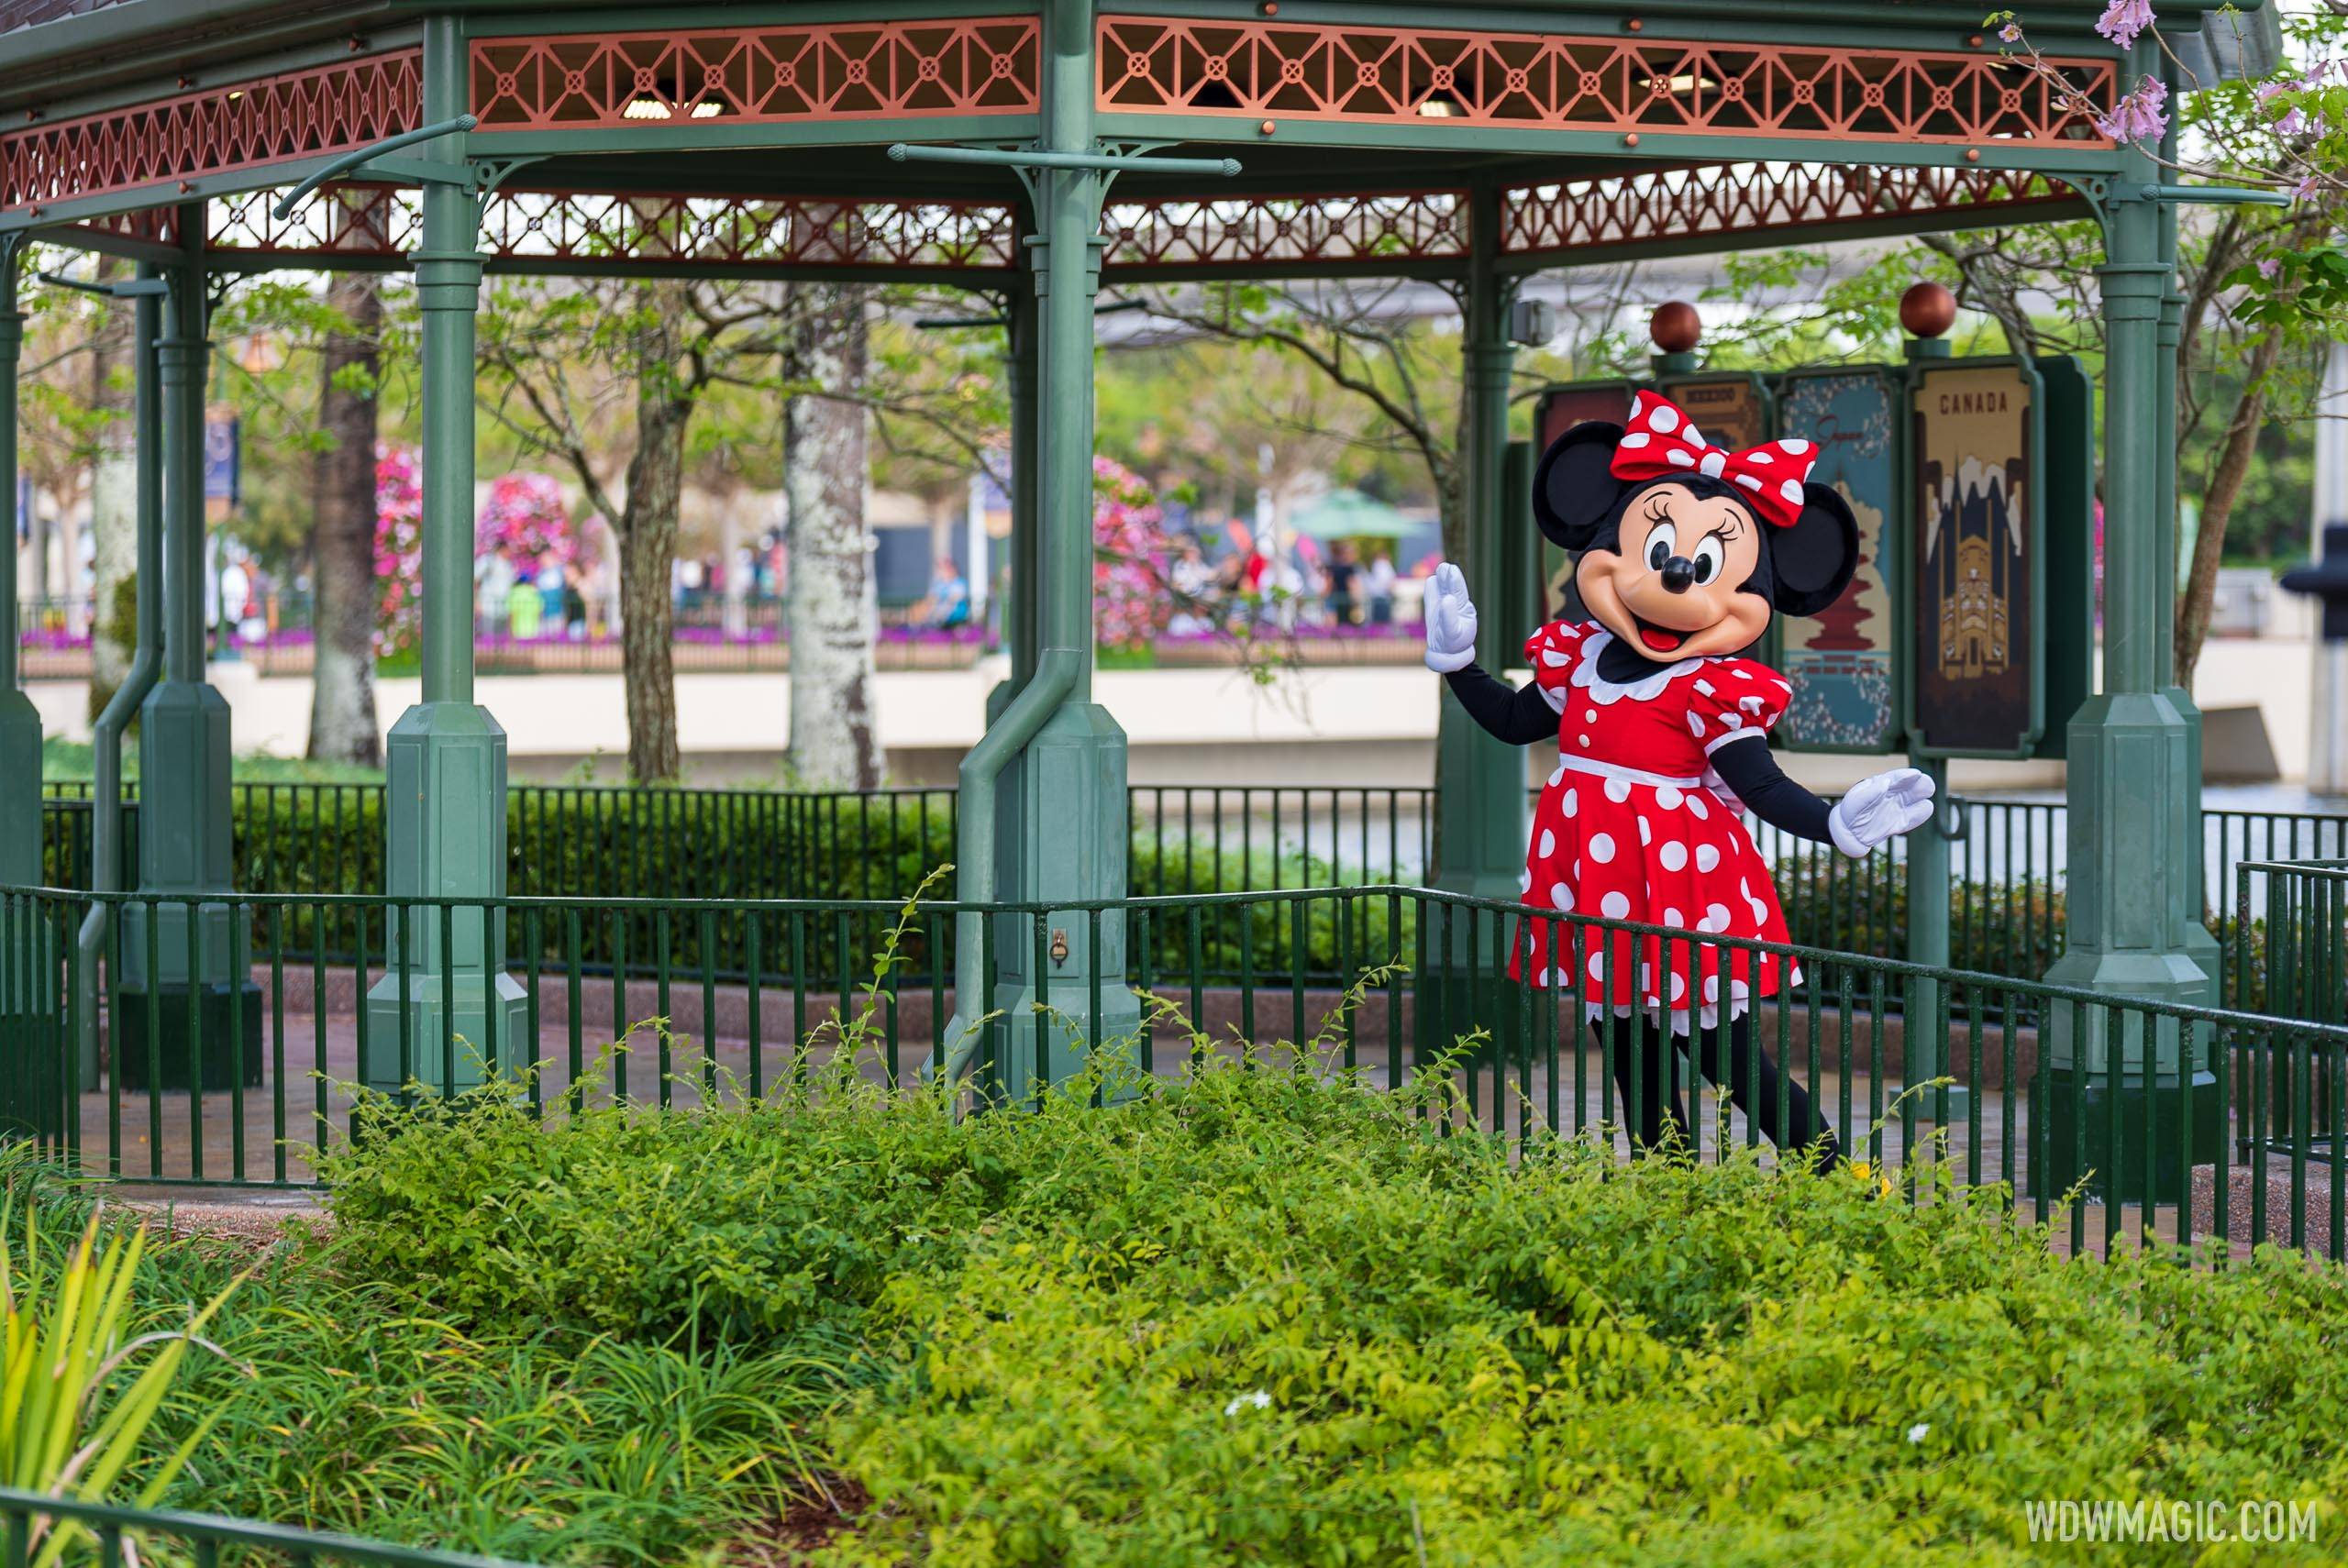 Distanced Minnie Mouse meet and greet at the EPCOT World Showcase Gazebo - March 2022